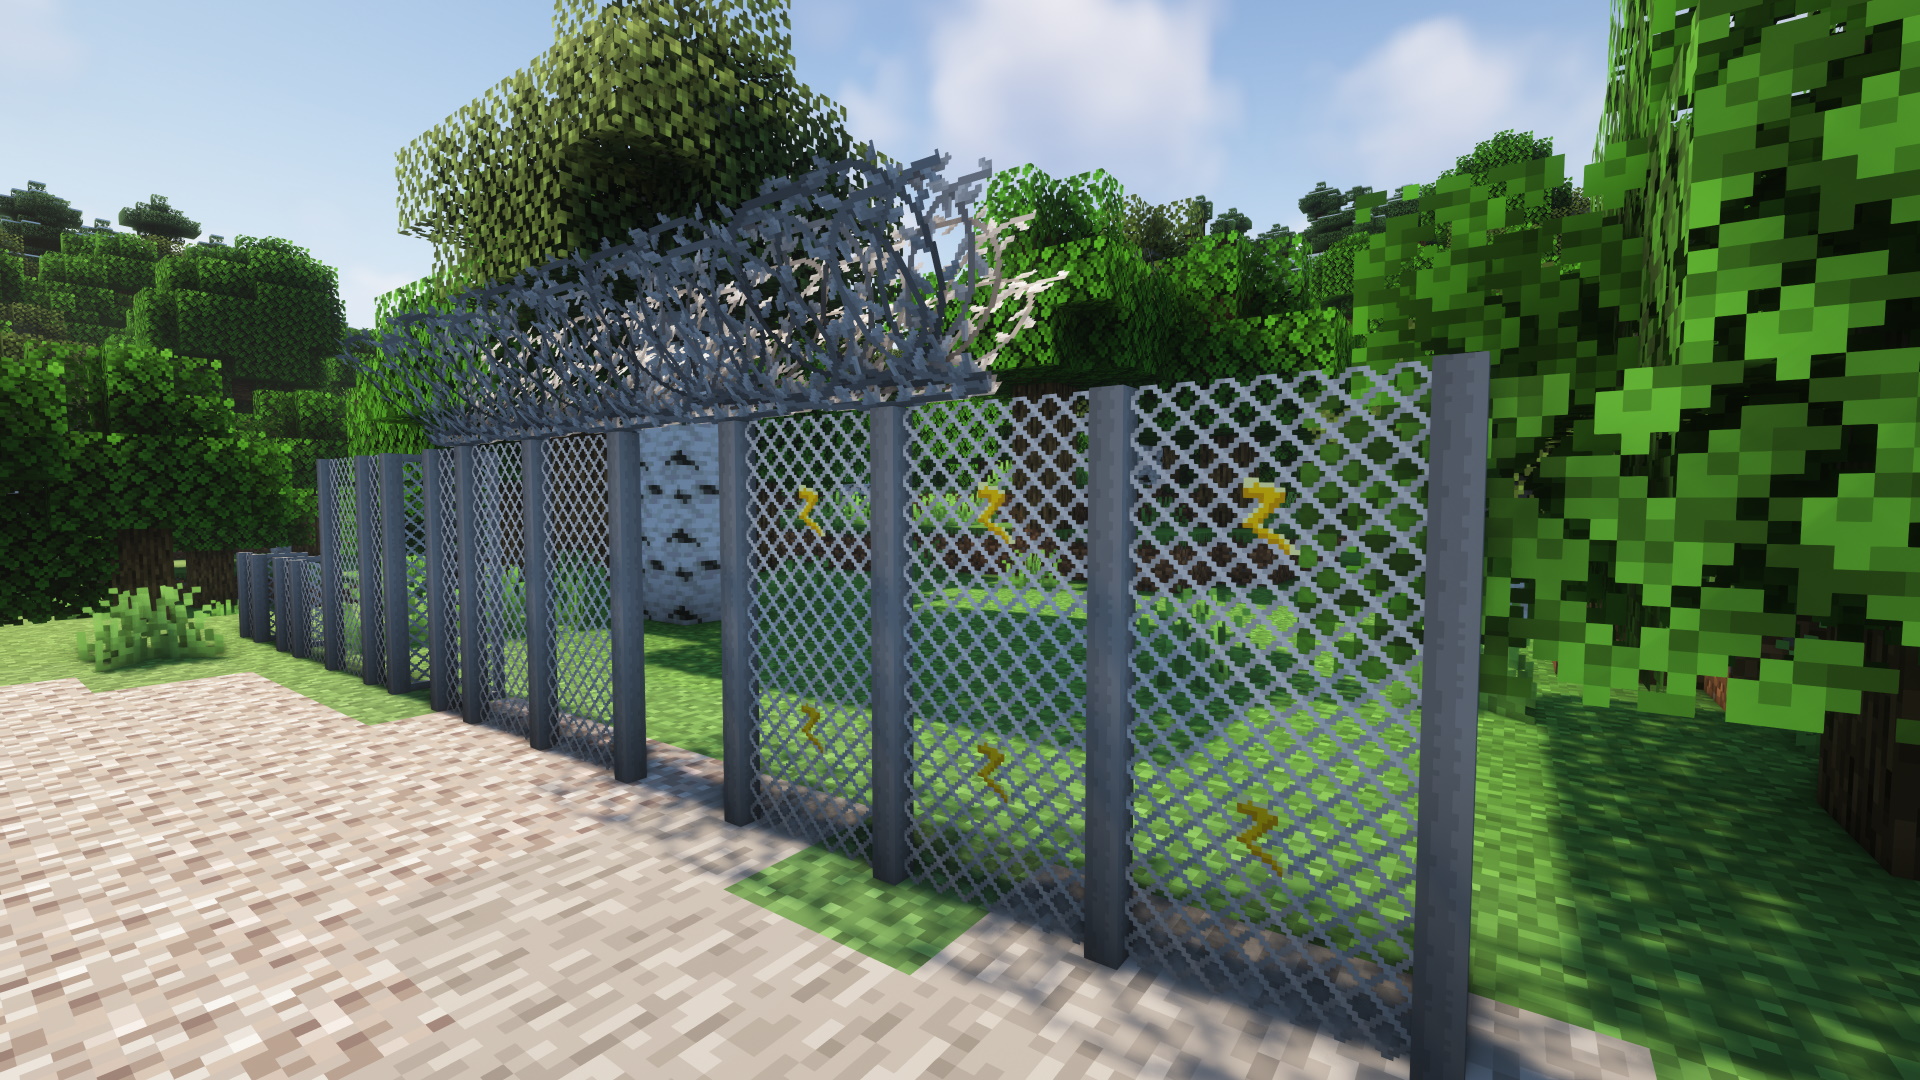 Chain Fence, Barbed Wire, Electric Chain Fence, and Chain Fence Gates